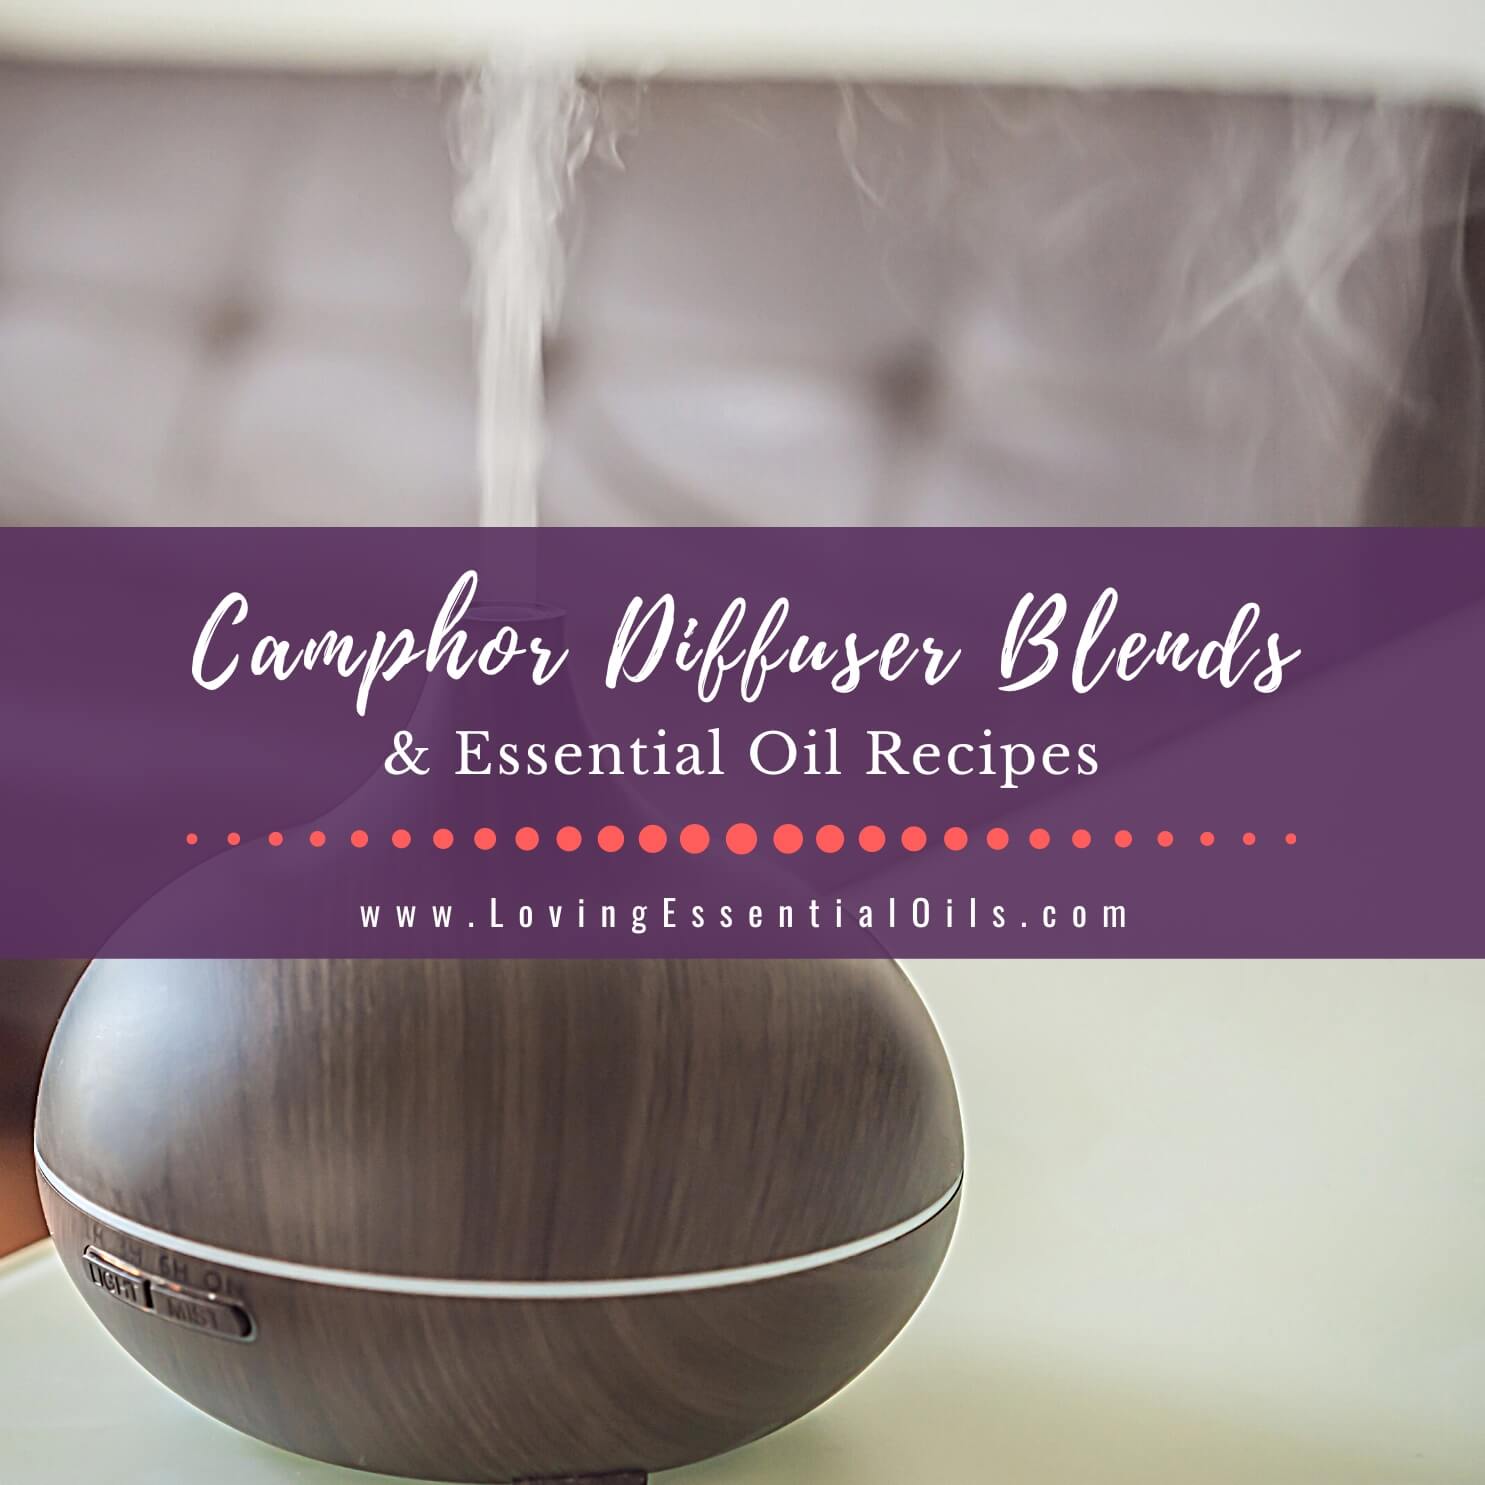 Camphor Diffuser Blends and Essential Oil Recipes by Loving Essential Oils